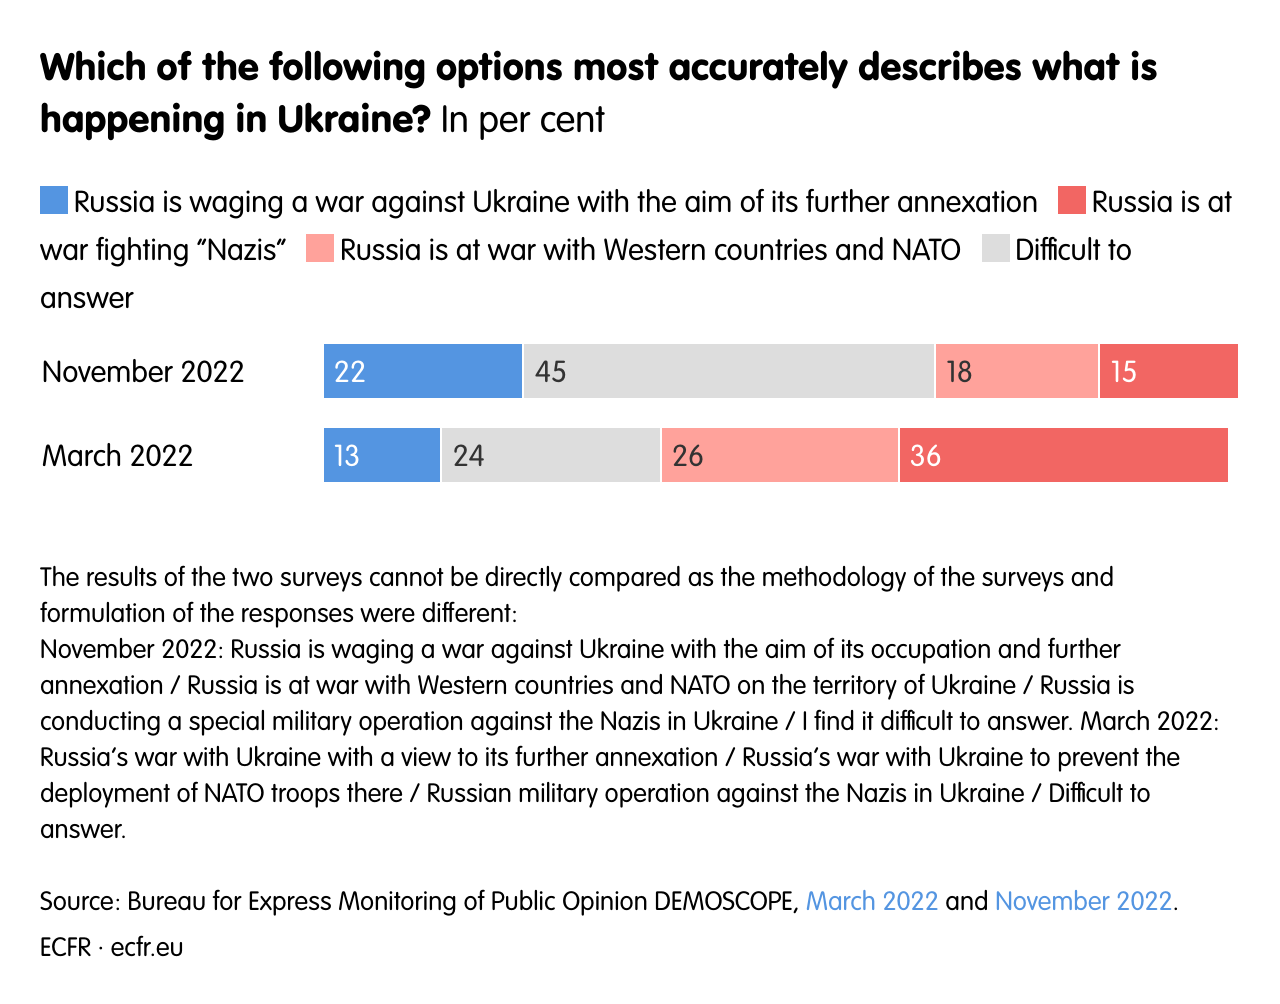 Which of the following options most accurately describes what is happening in Ukraine?